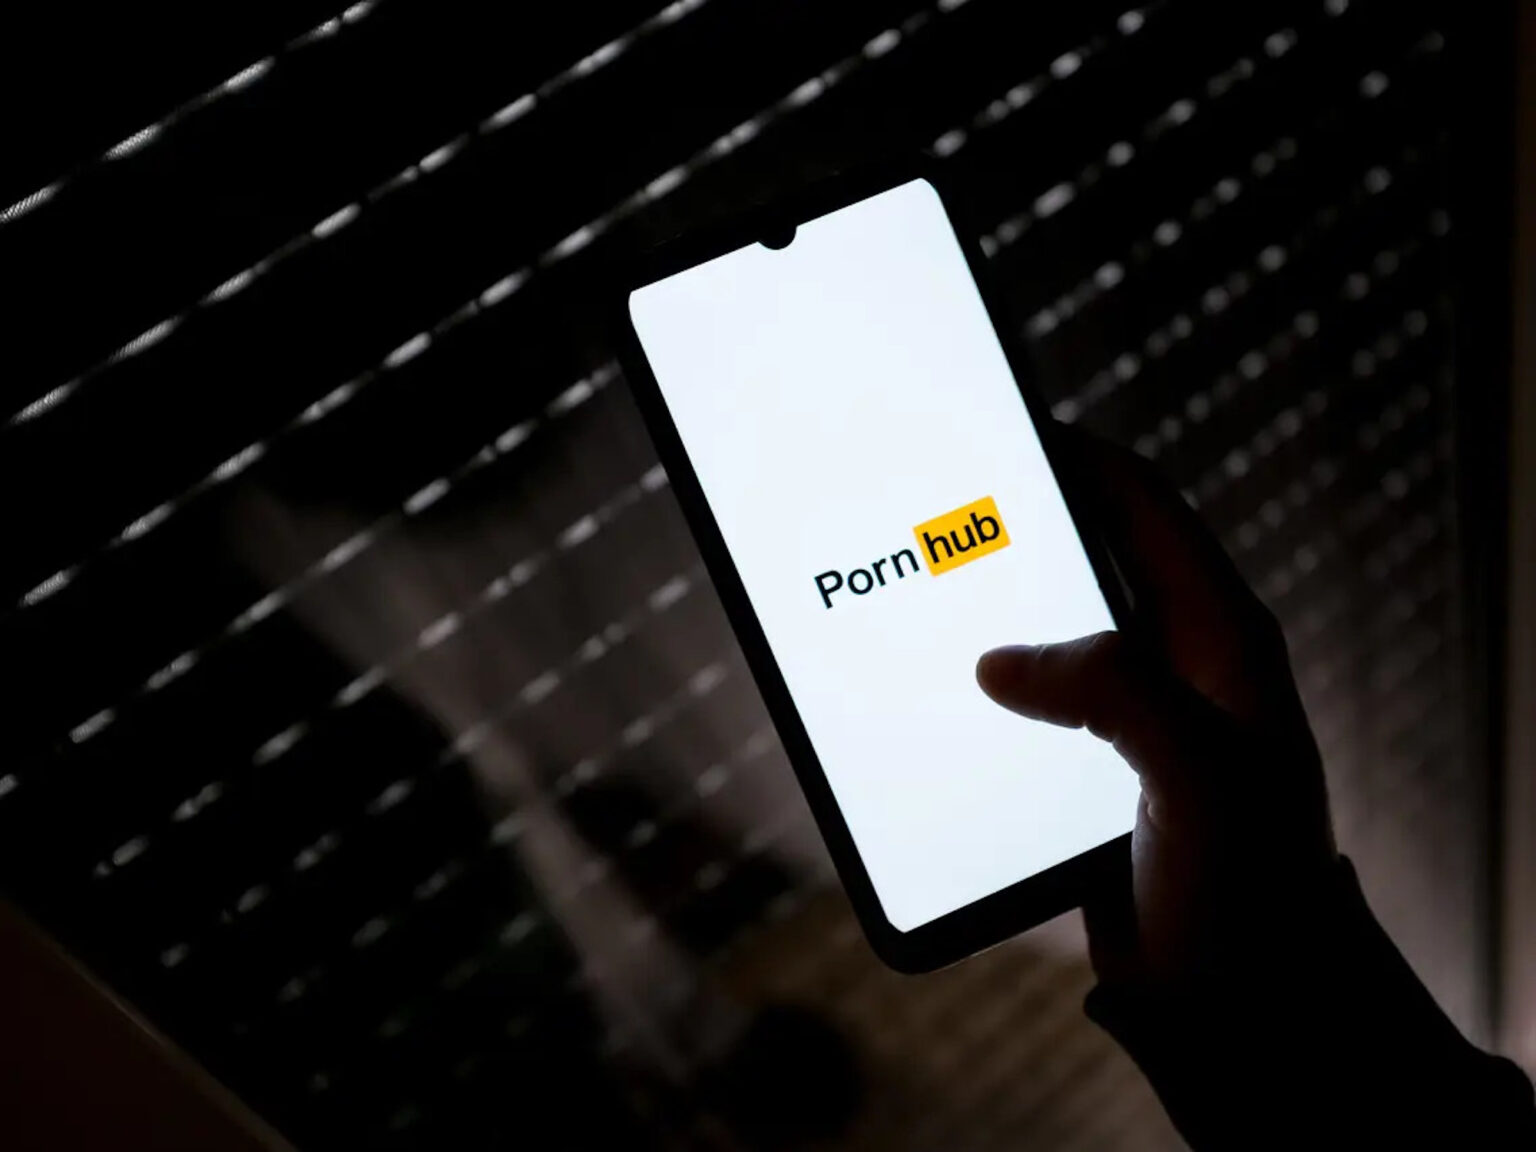 After an article alleged PornHub of sex trafficking and child porn, two top execs of the site’s parent company resigned. Uncover the MindGeek scandal now.